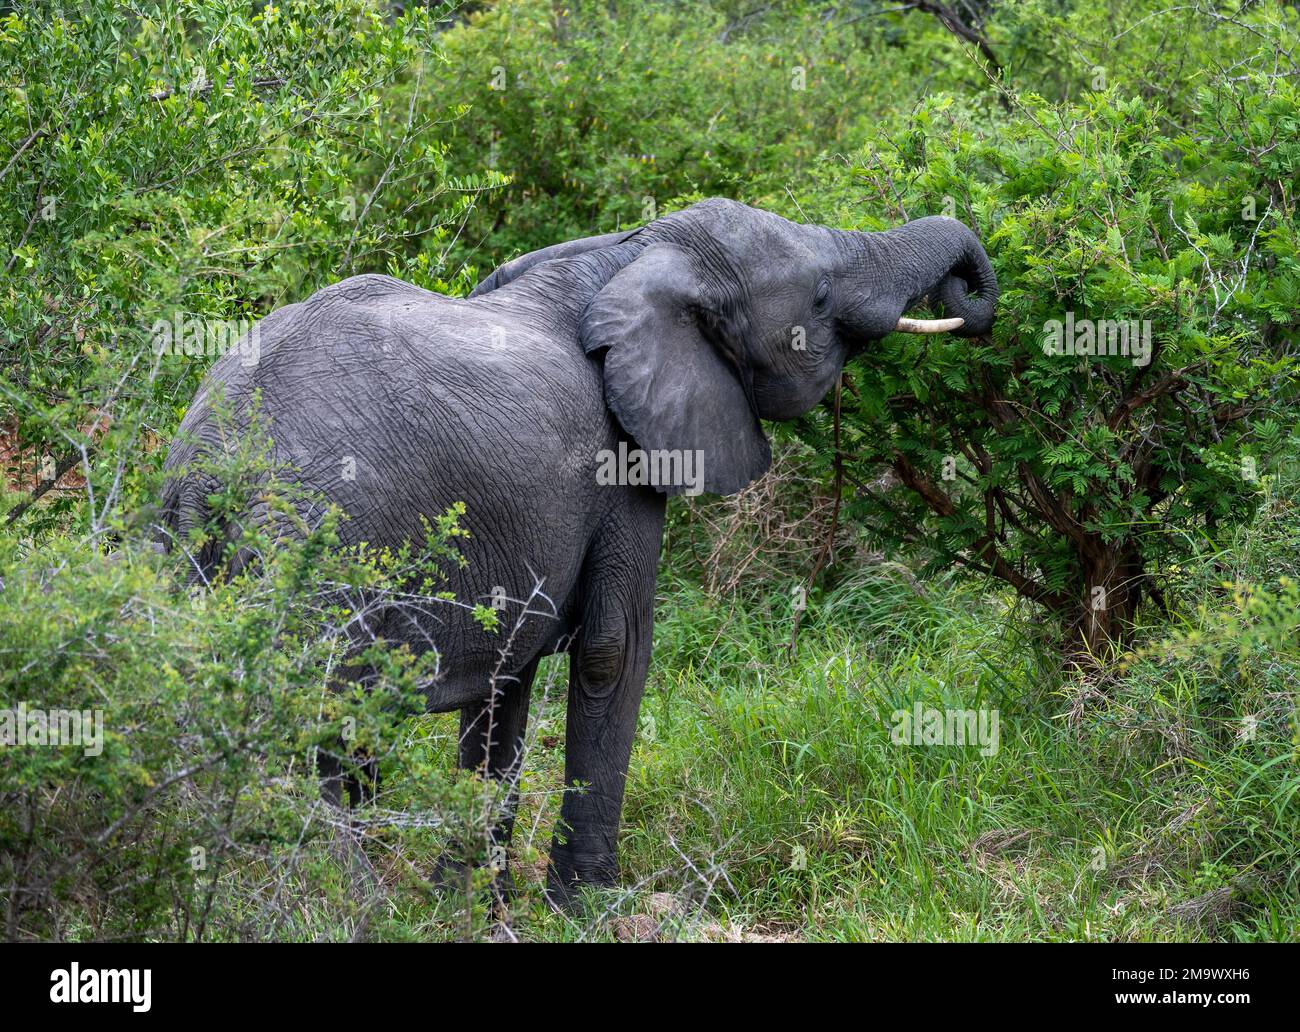 A young adult African elephant (Loxodonta africana). Kruger National Park, South Africa. Stock Photo